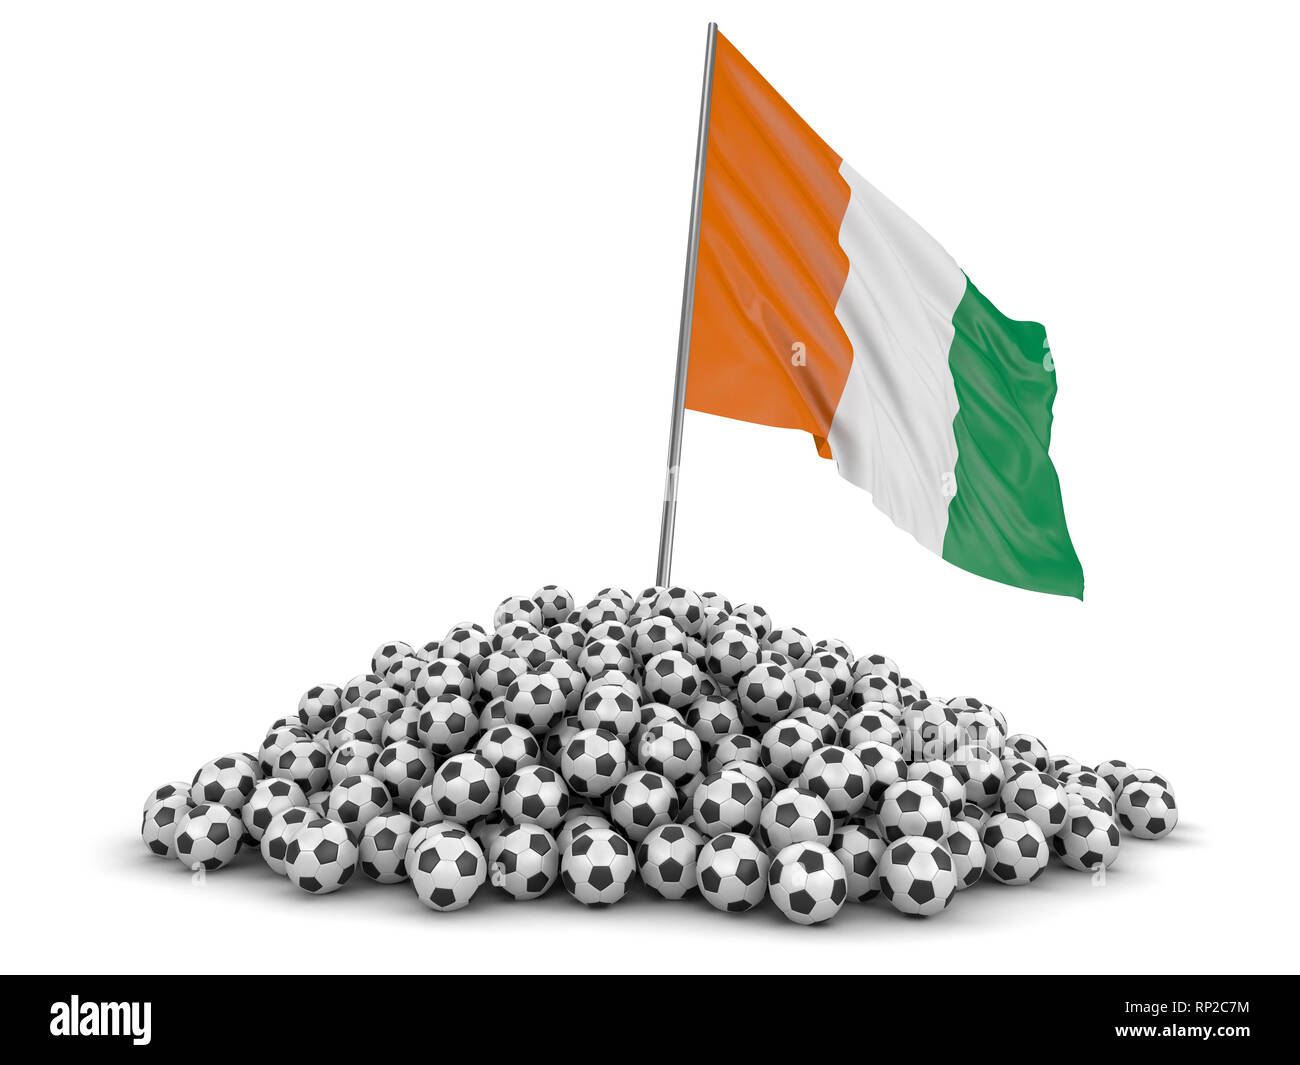 Pile of Soccer footballs and flag. Image with clipping path Stock Photo